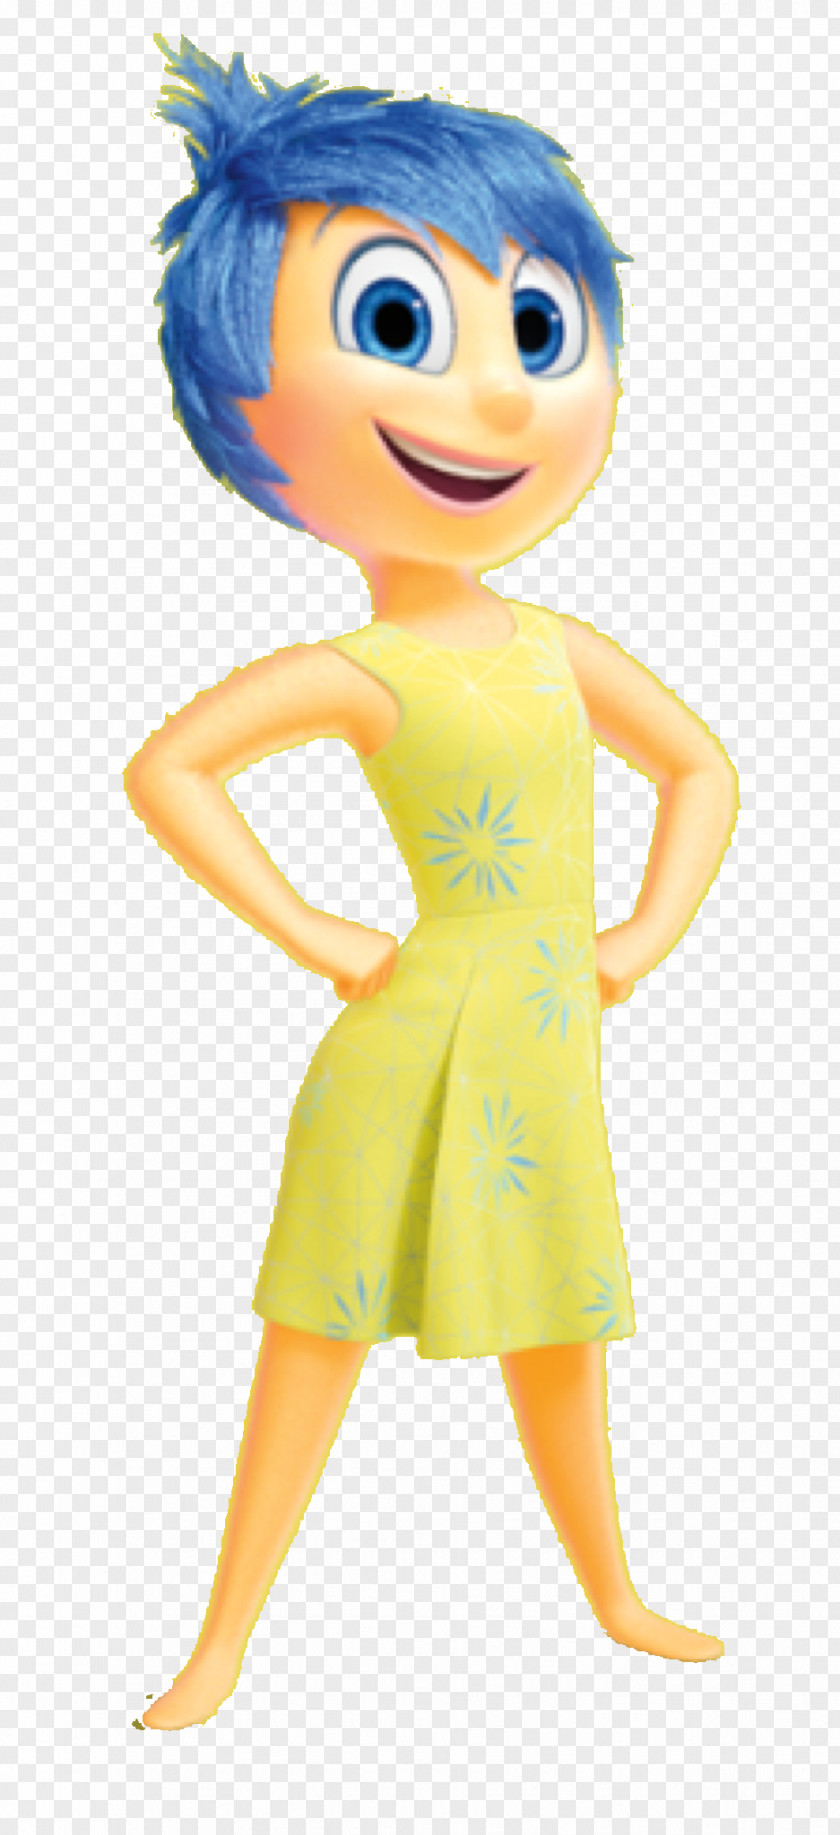 Inside Out Disgust Riley Pixar Sadness Happiness Film Image PNG